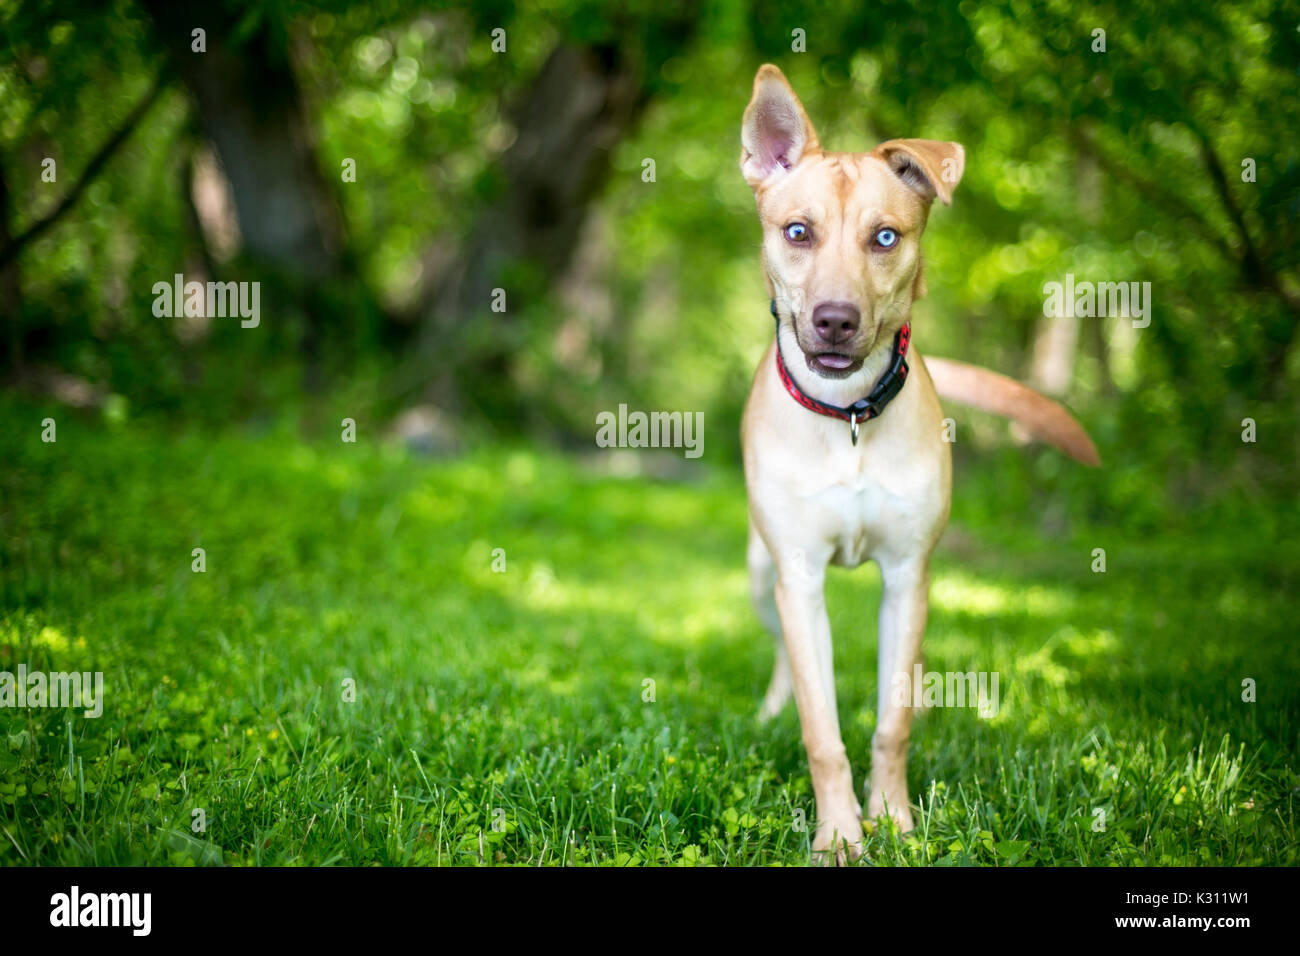 A mixed breed dog with sectoral heterochromia in its eyes Stock Photo